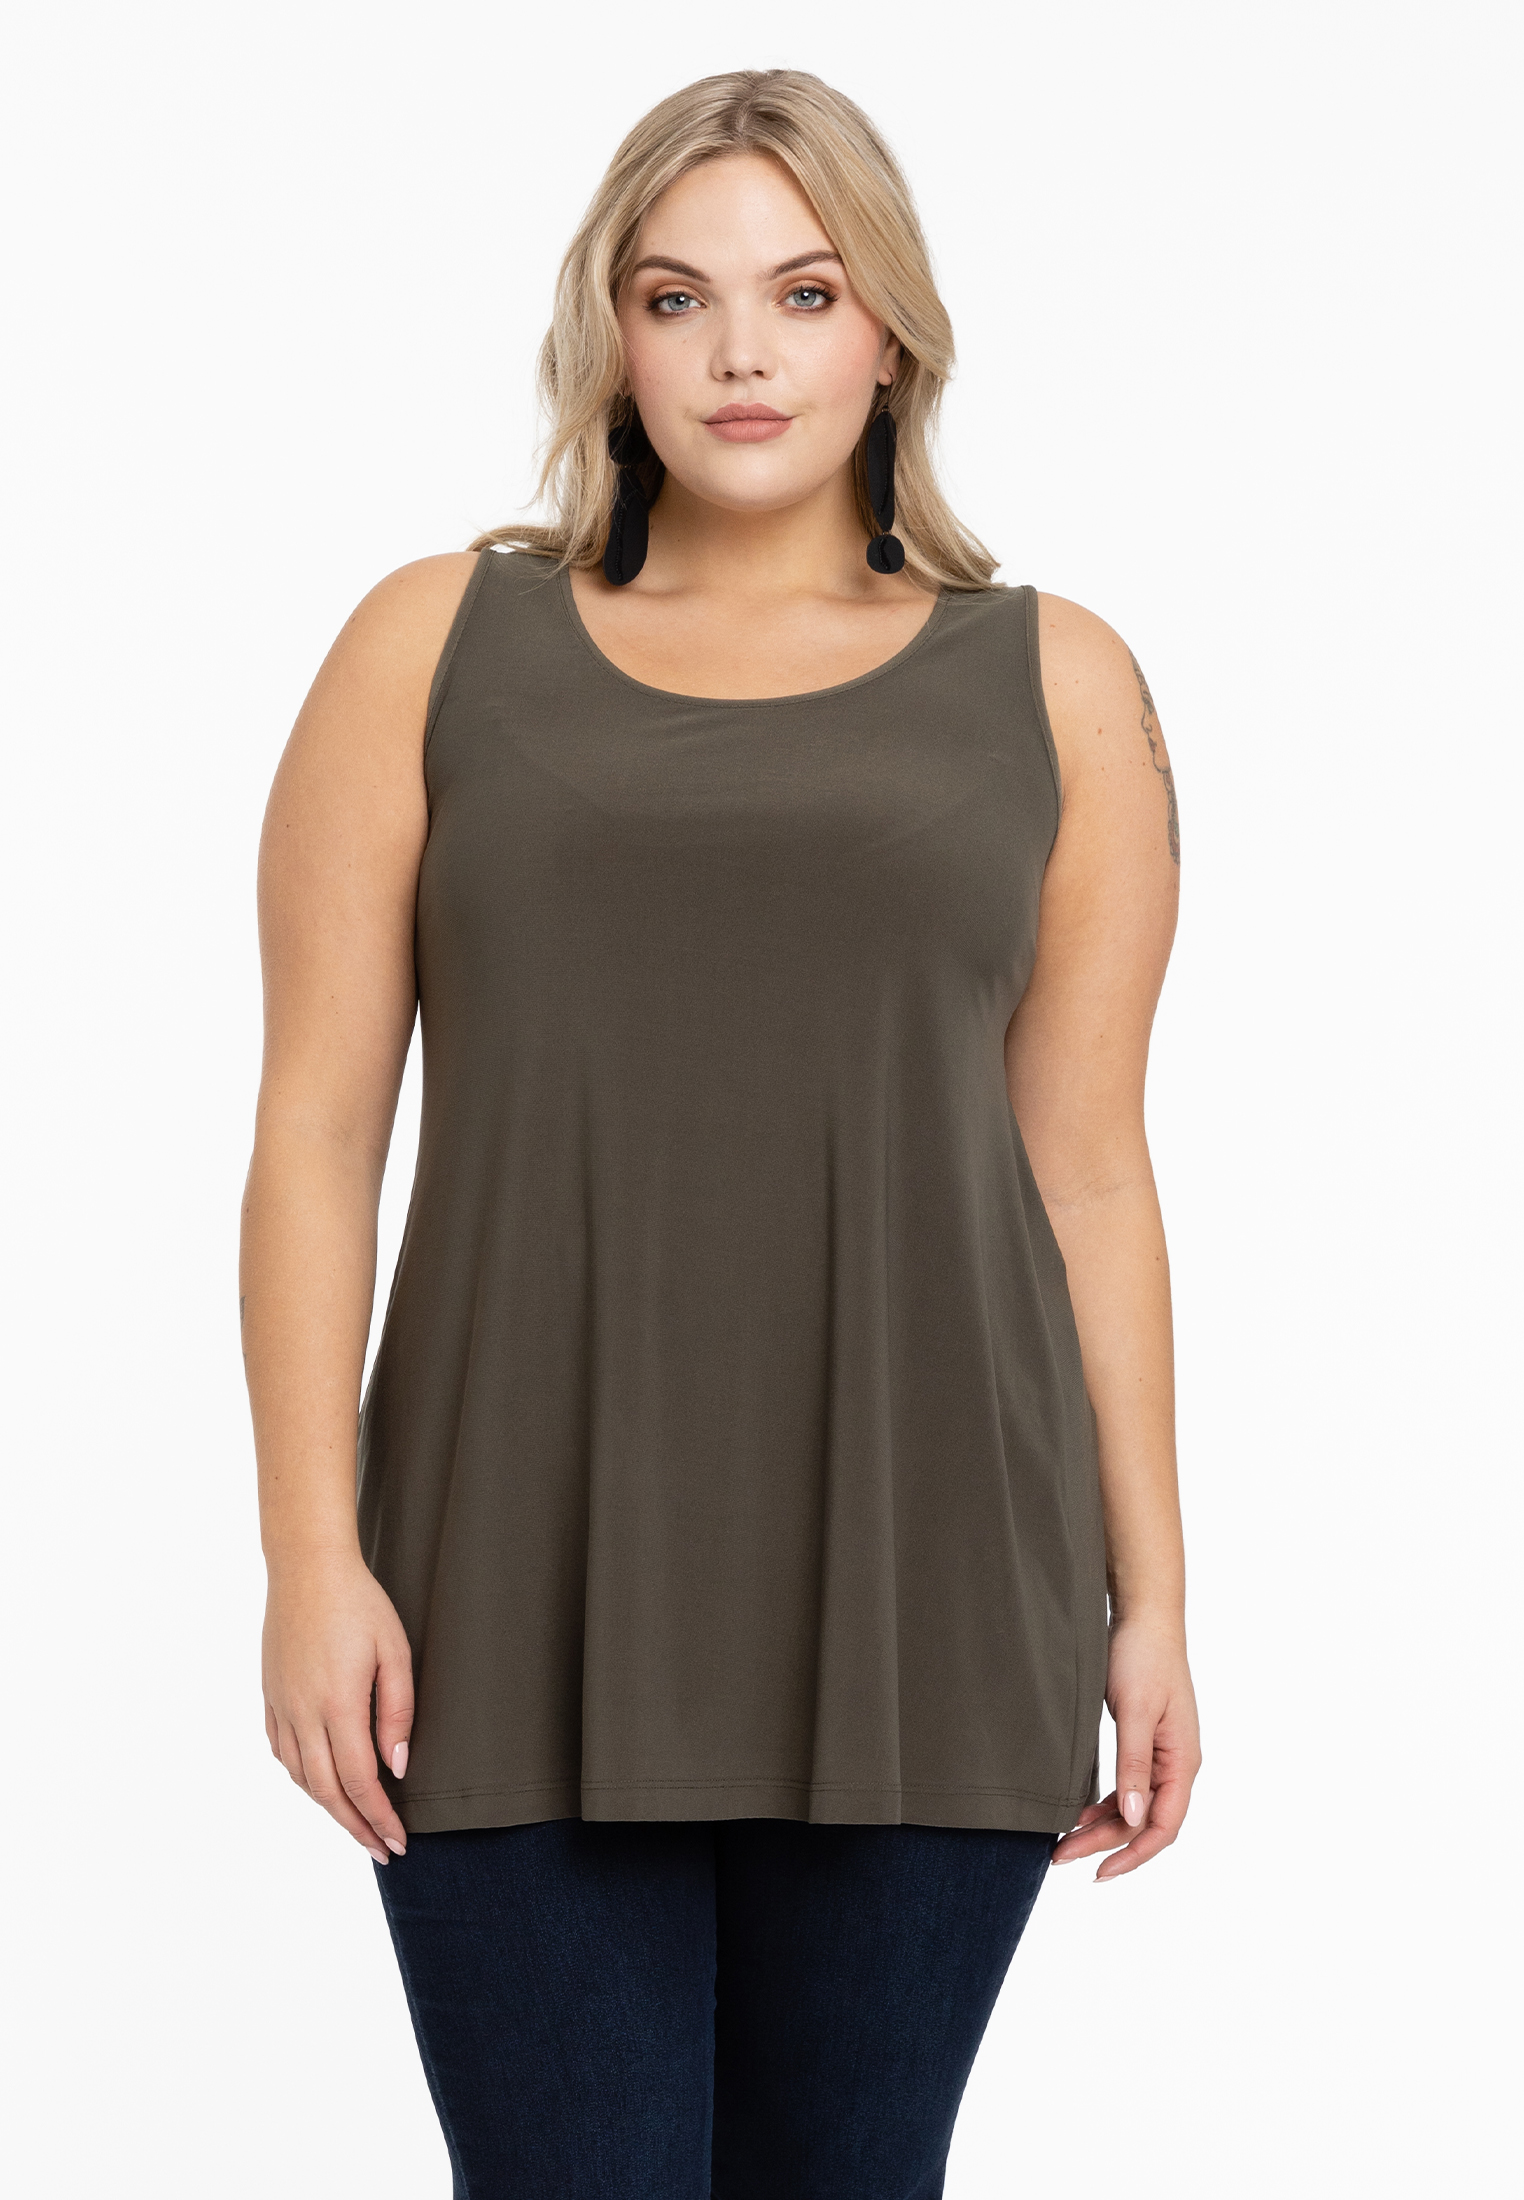 Top flare DOLCE 54/56 light green